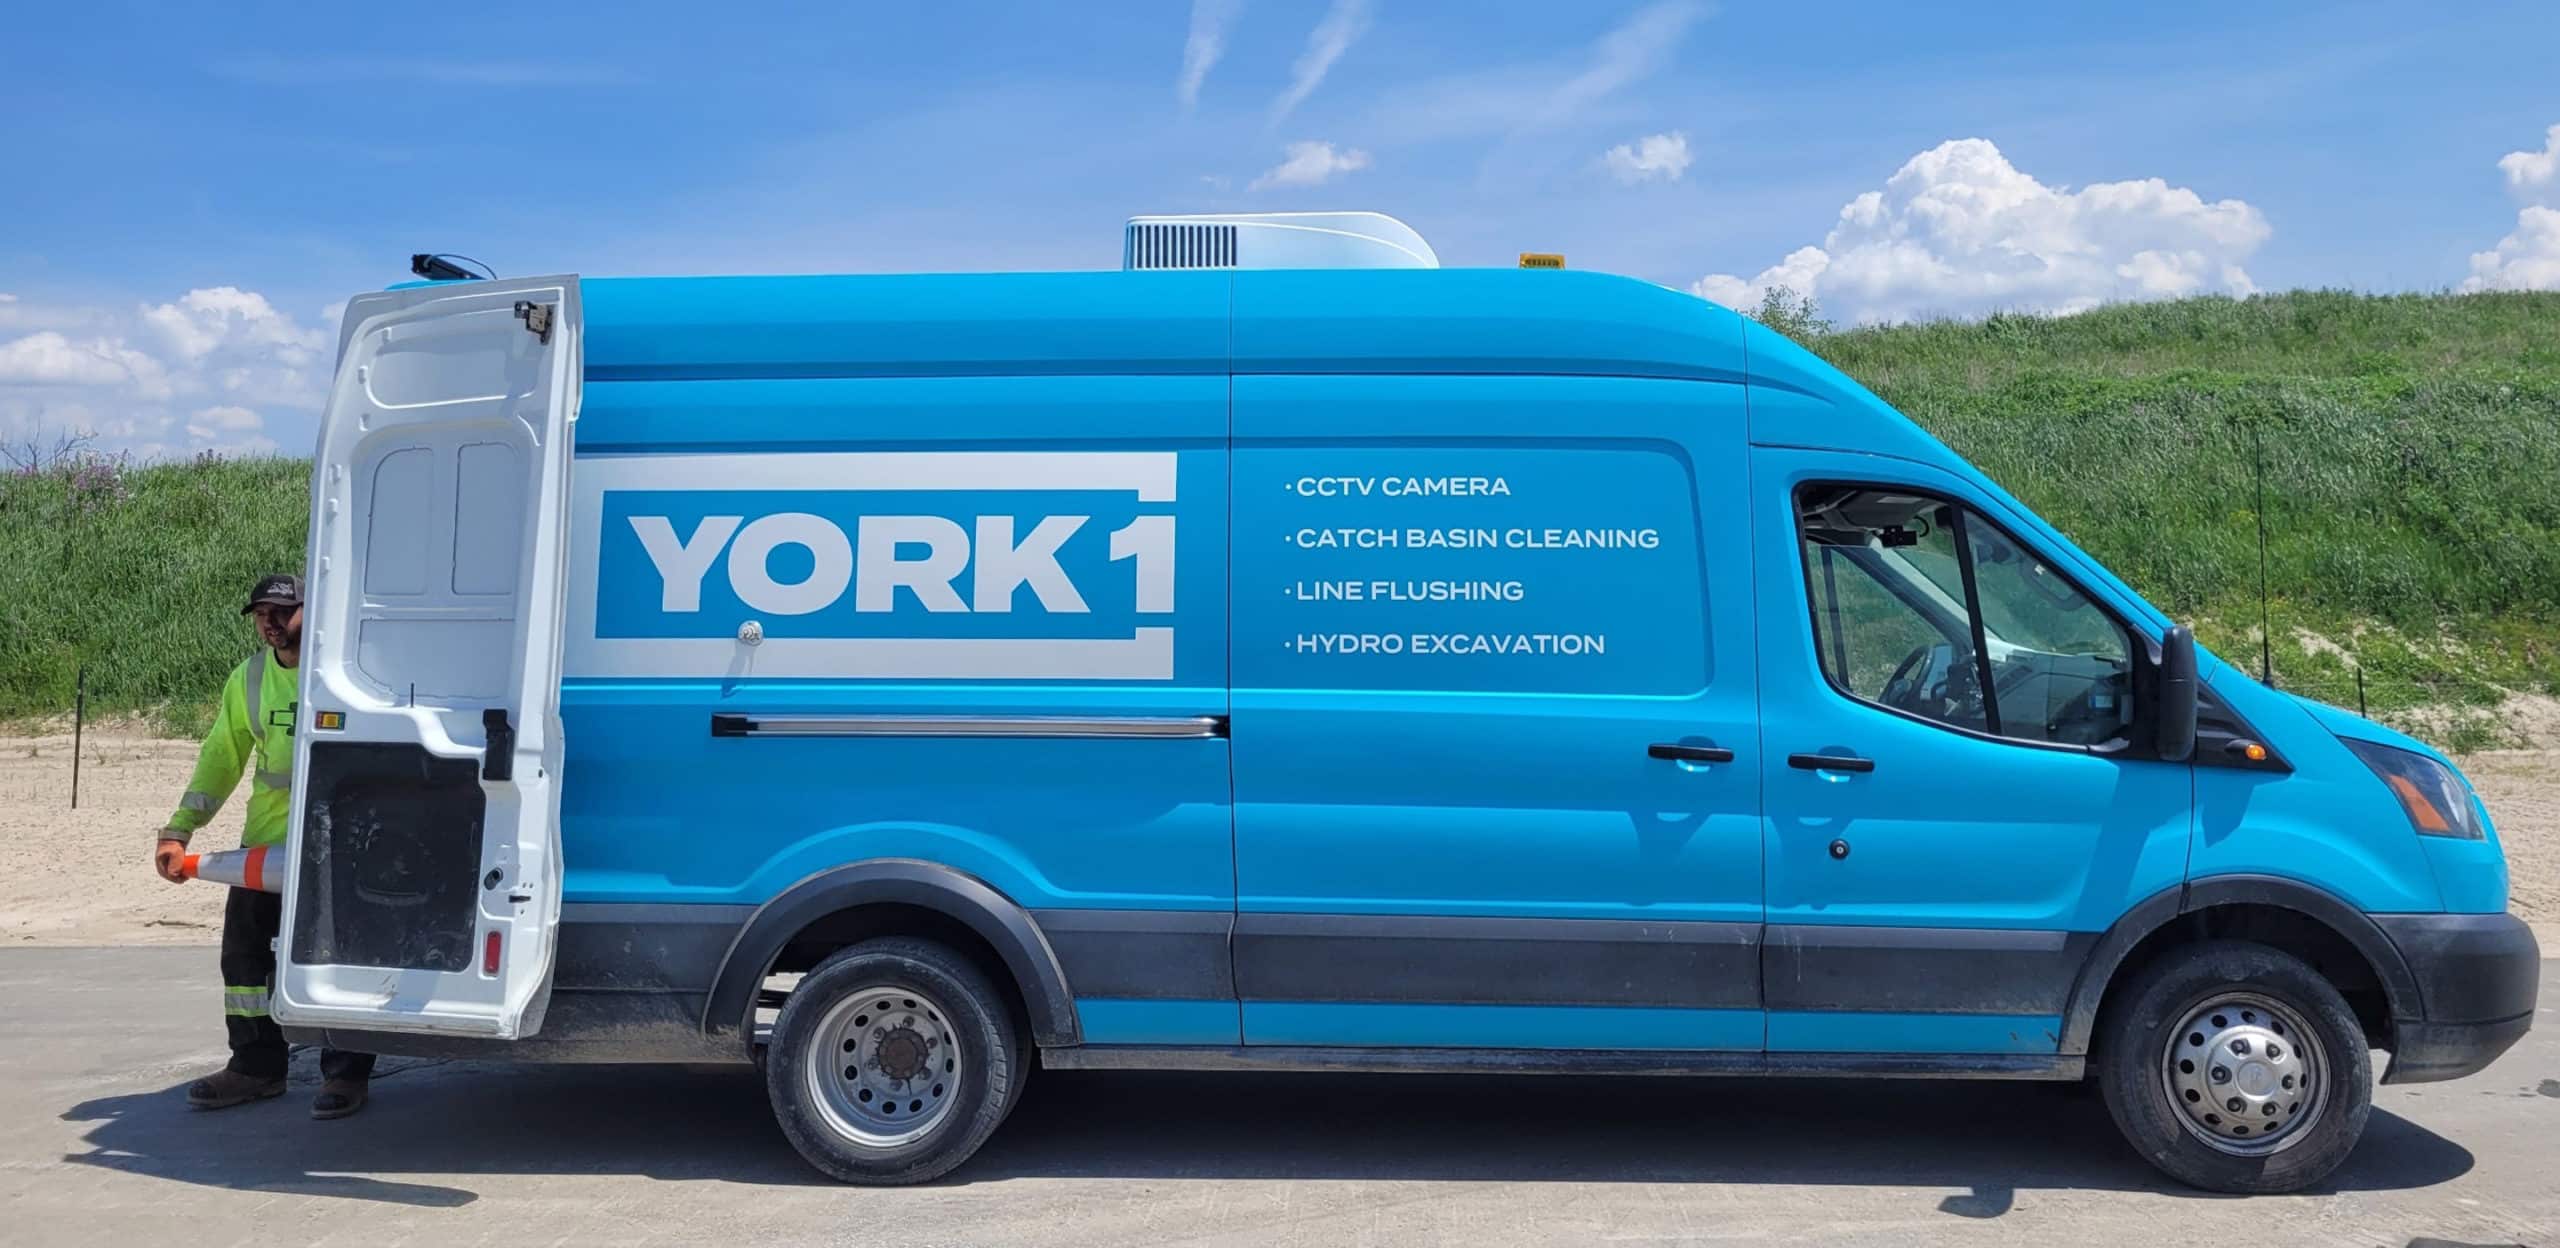 cyan York1 sprinter truck with the back doors open and an employee holding cable